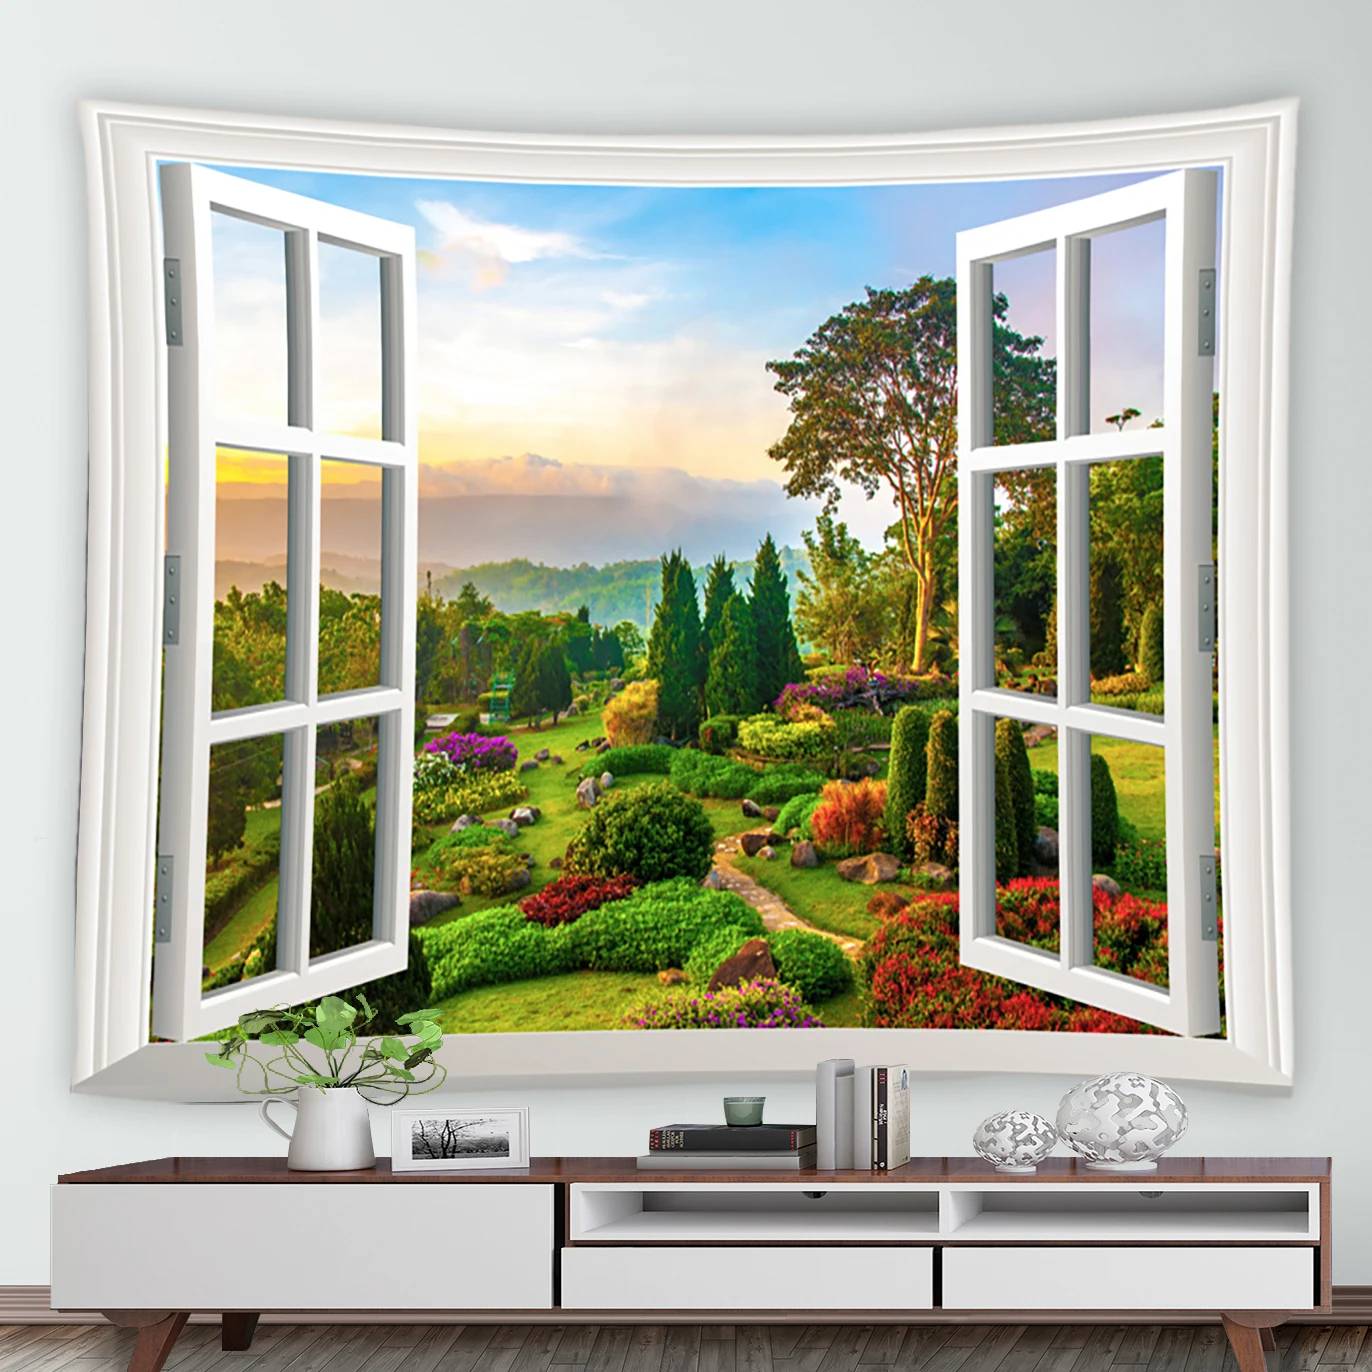 

Outside the Window Garden Landscape Tapestry Green Plants Trees Purple Red Flowers Wall Hanging Natural Scenery Tapestries Decor